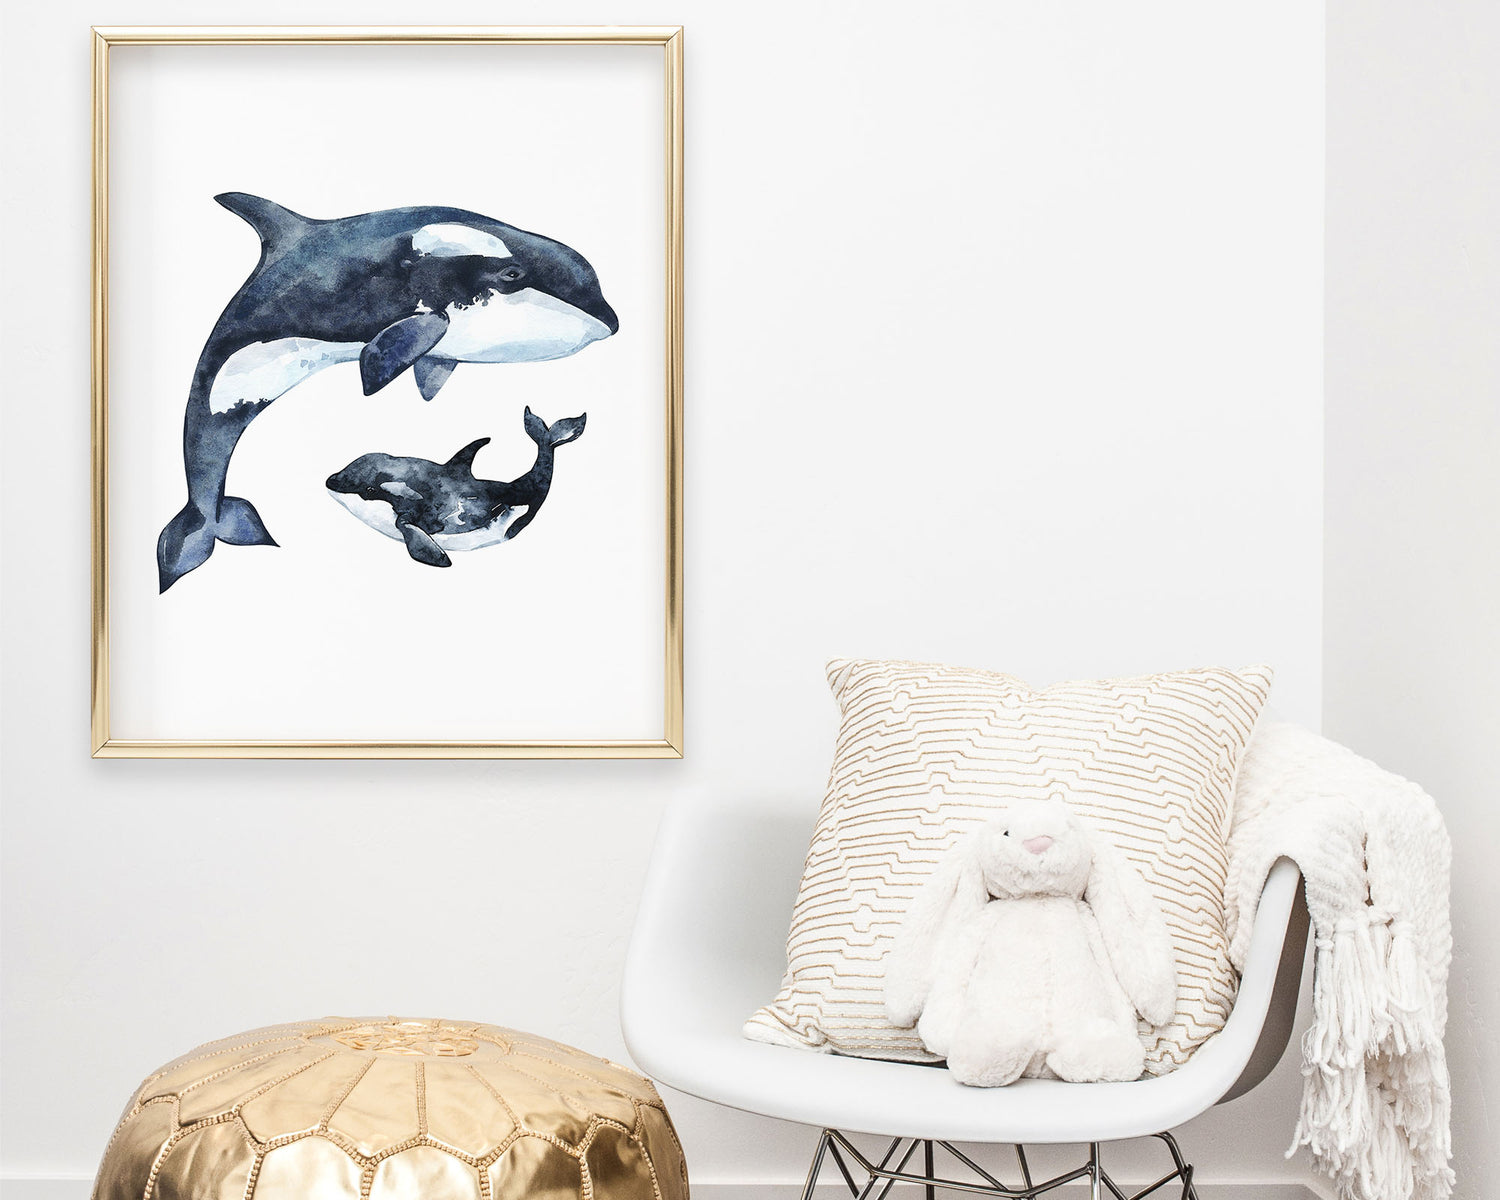 Watercolor Orca Whale Printable Wall Art featuring deep dark navy blue and black watercolor orca whale illustrations. Perfect for Baby Boy Ocean Nursery Decor, Baby Girl Coastal Nursery Wall Art or Nautical Kids Room Decor.